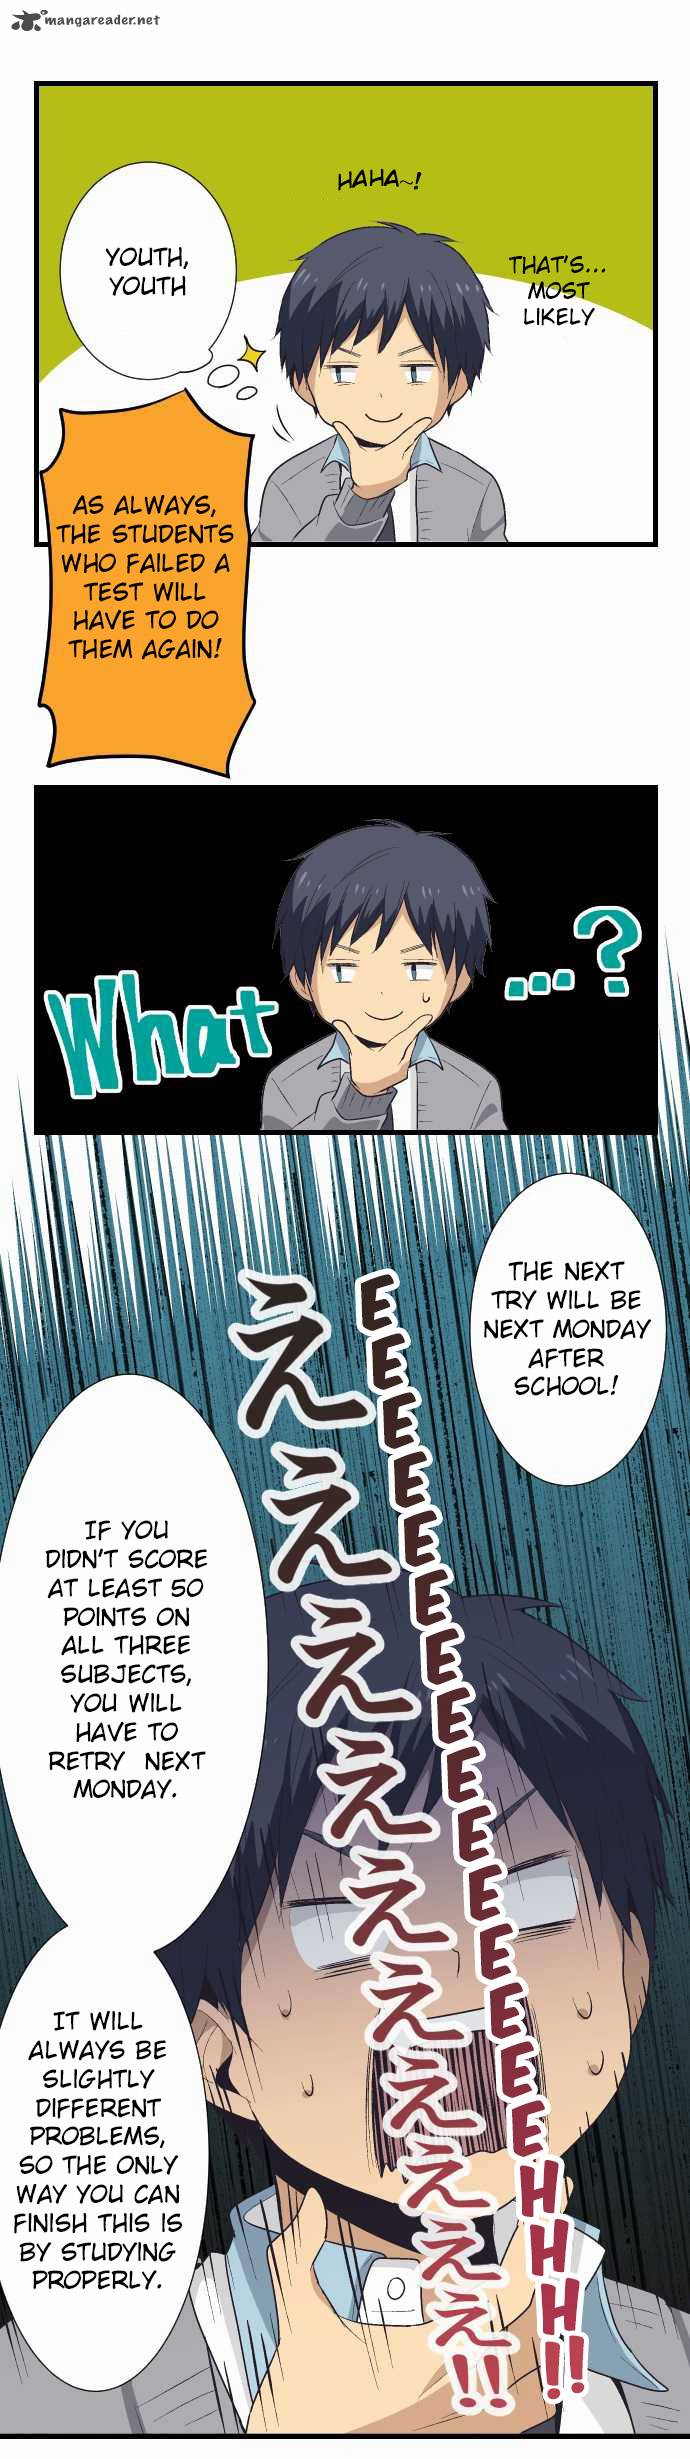 Relife 21 11